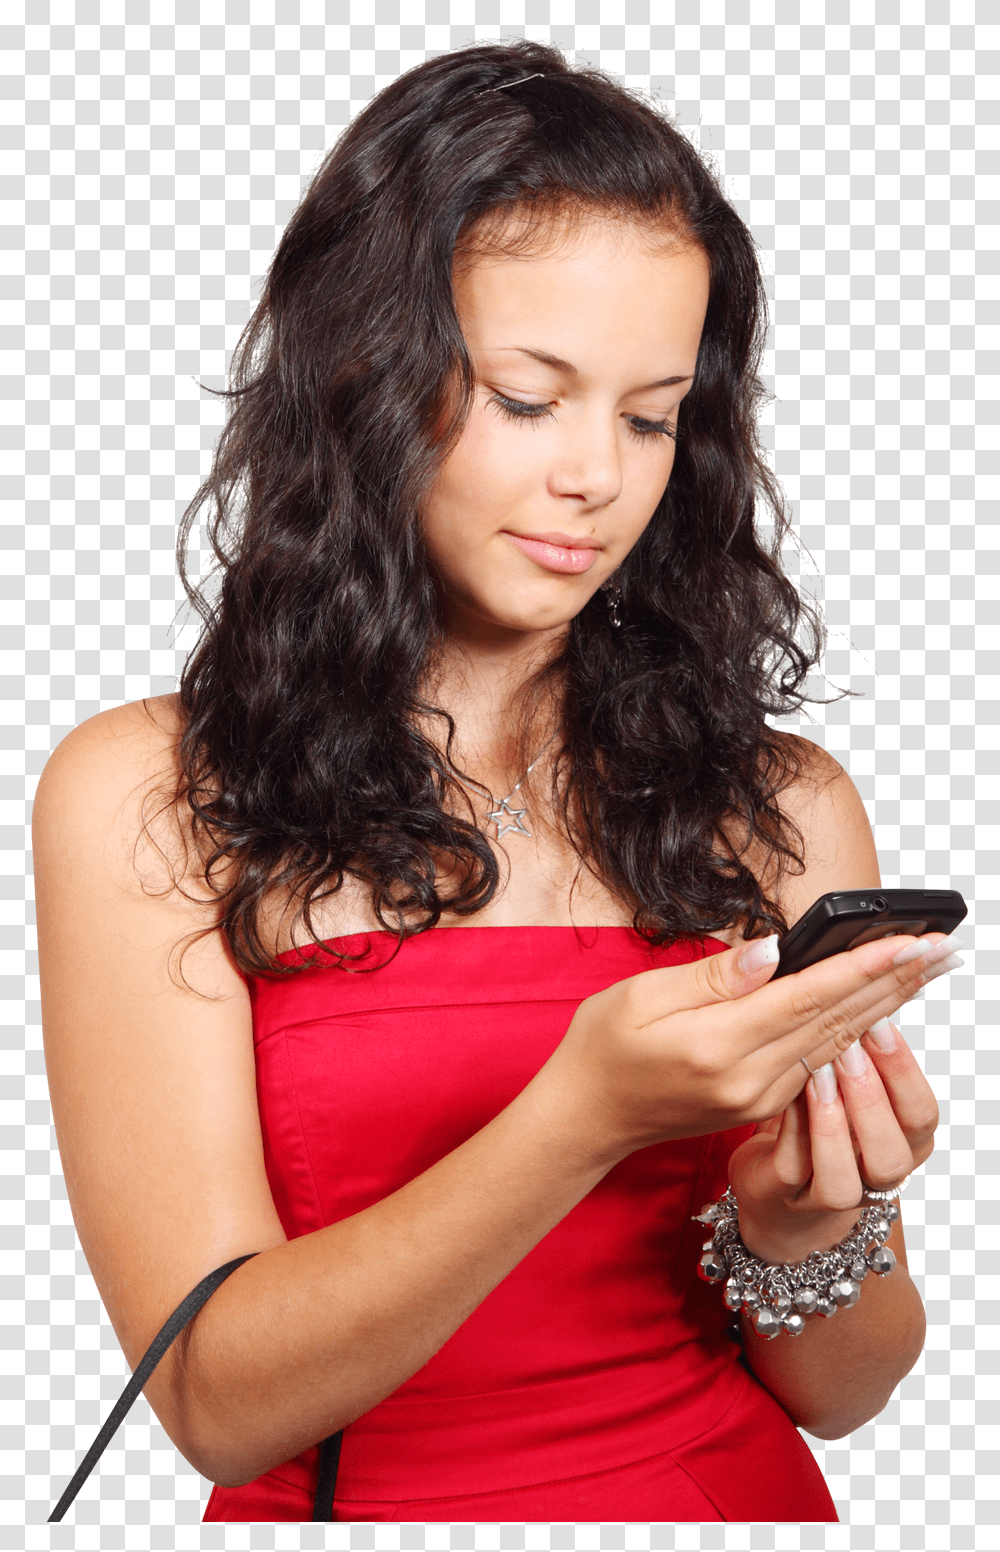 Typing And Vectors For Free Download Dlpngcom Black Girl Holding Phone, Person, Human, Electronics, Mobile Phone Transparent Png